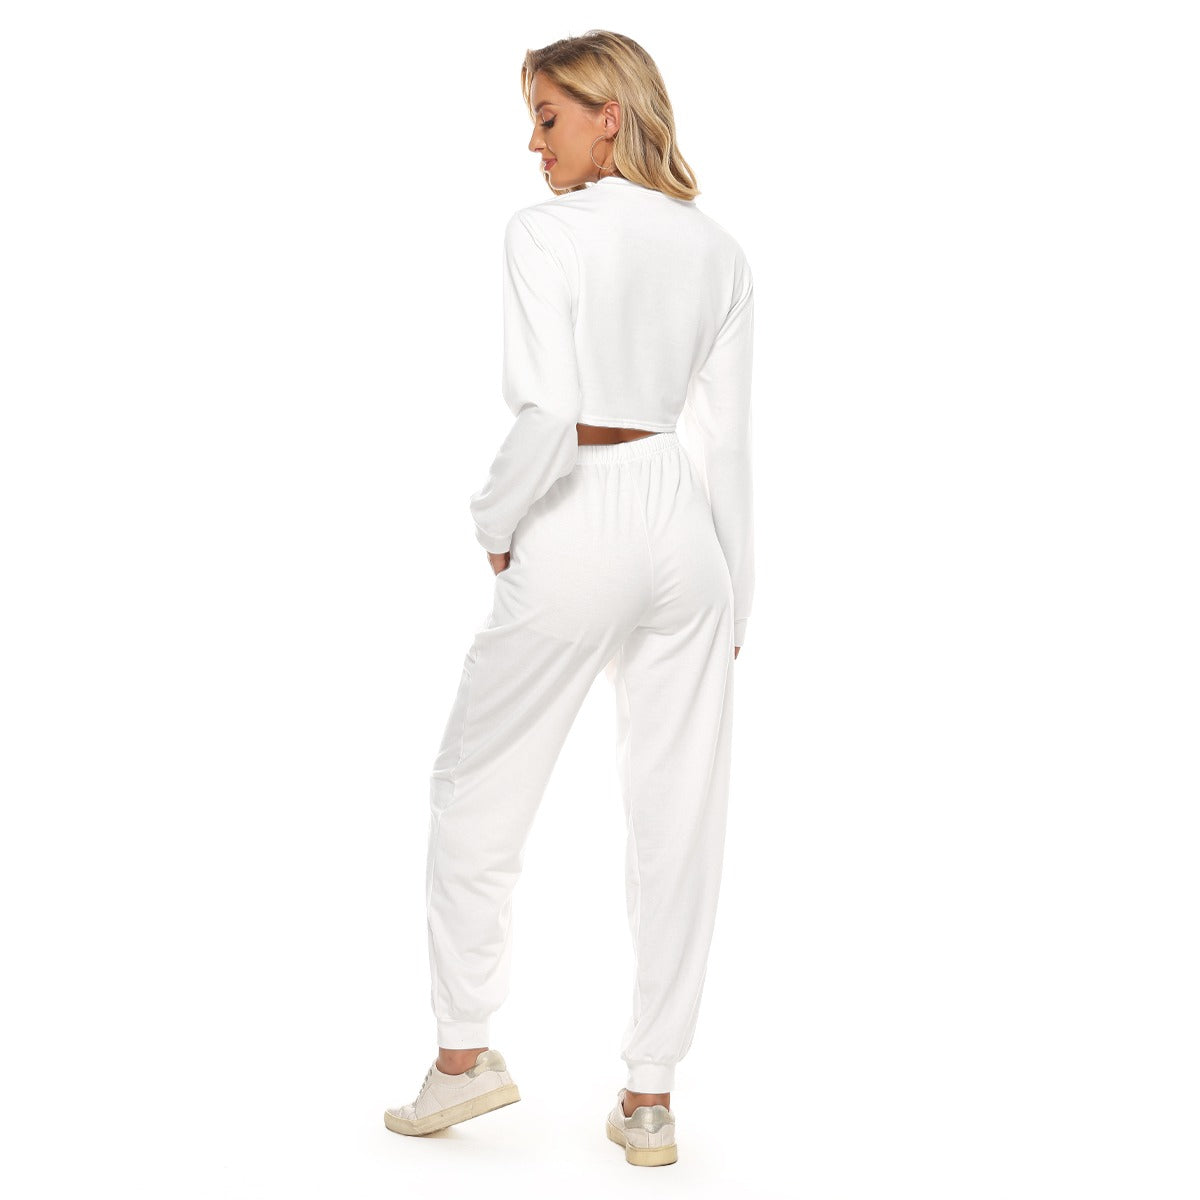 KERB DJ KERBY on the One's and Two's Women's Crop Sweatshirt Suit